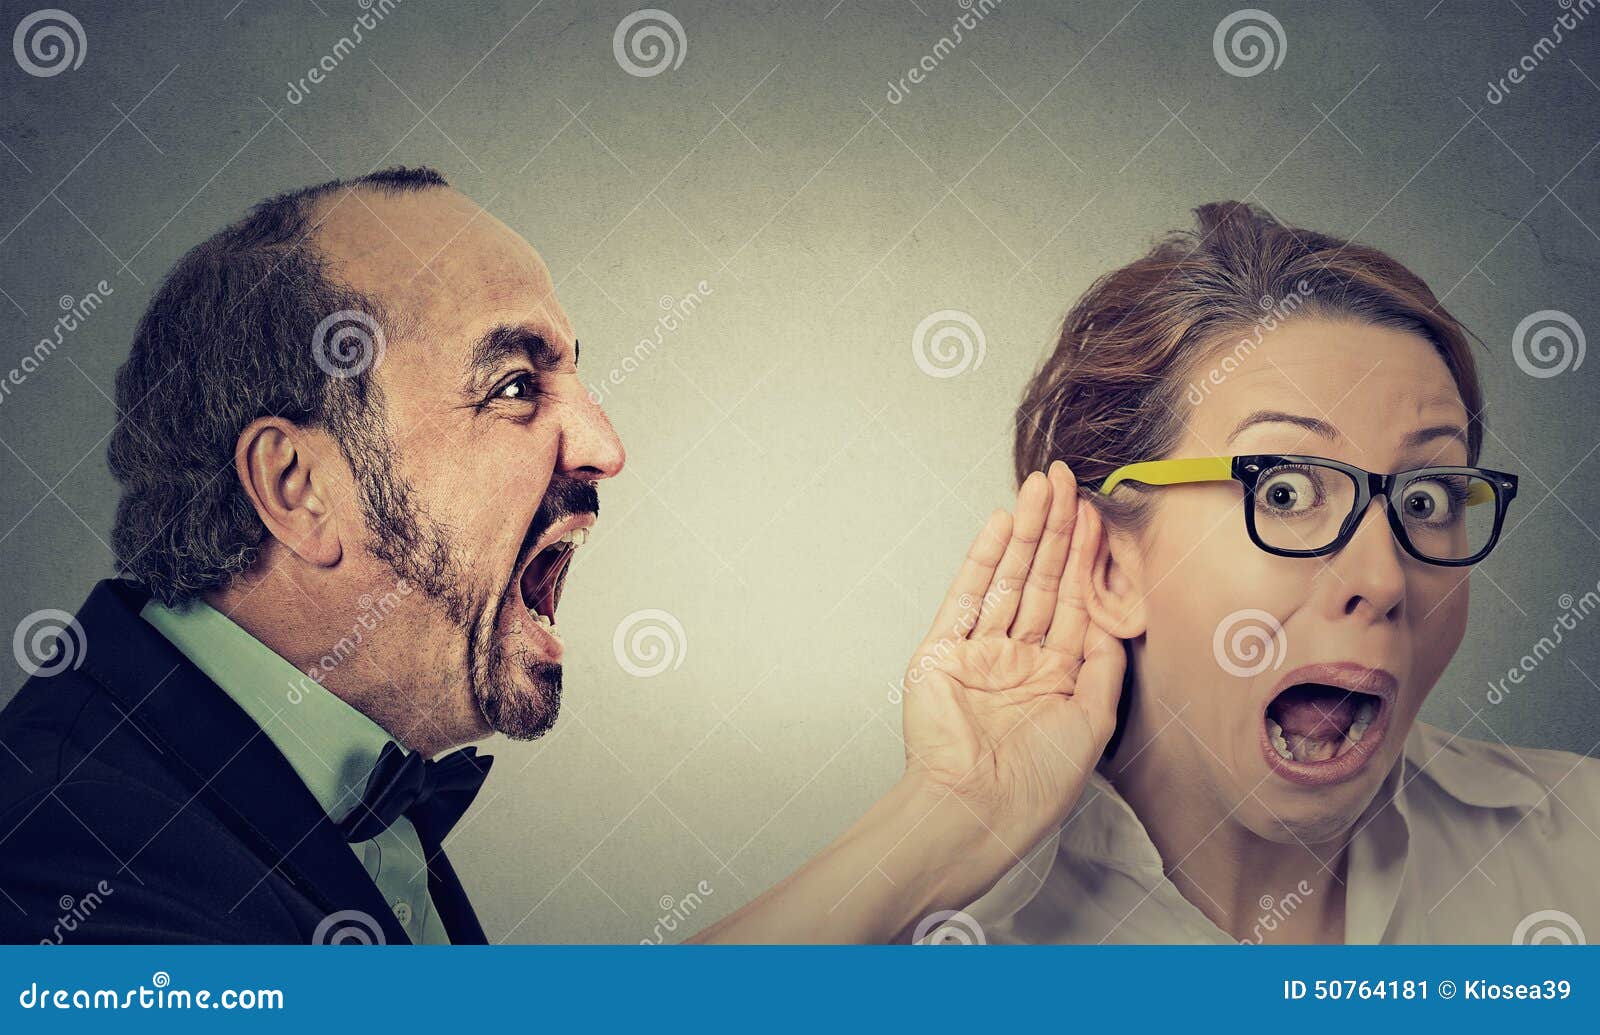 Angry Man Screaming Curious Woman With Hand To Ear Gesture Listens 